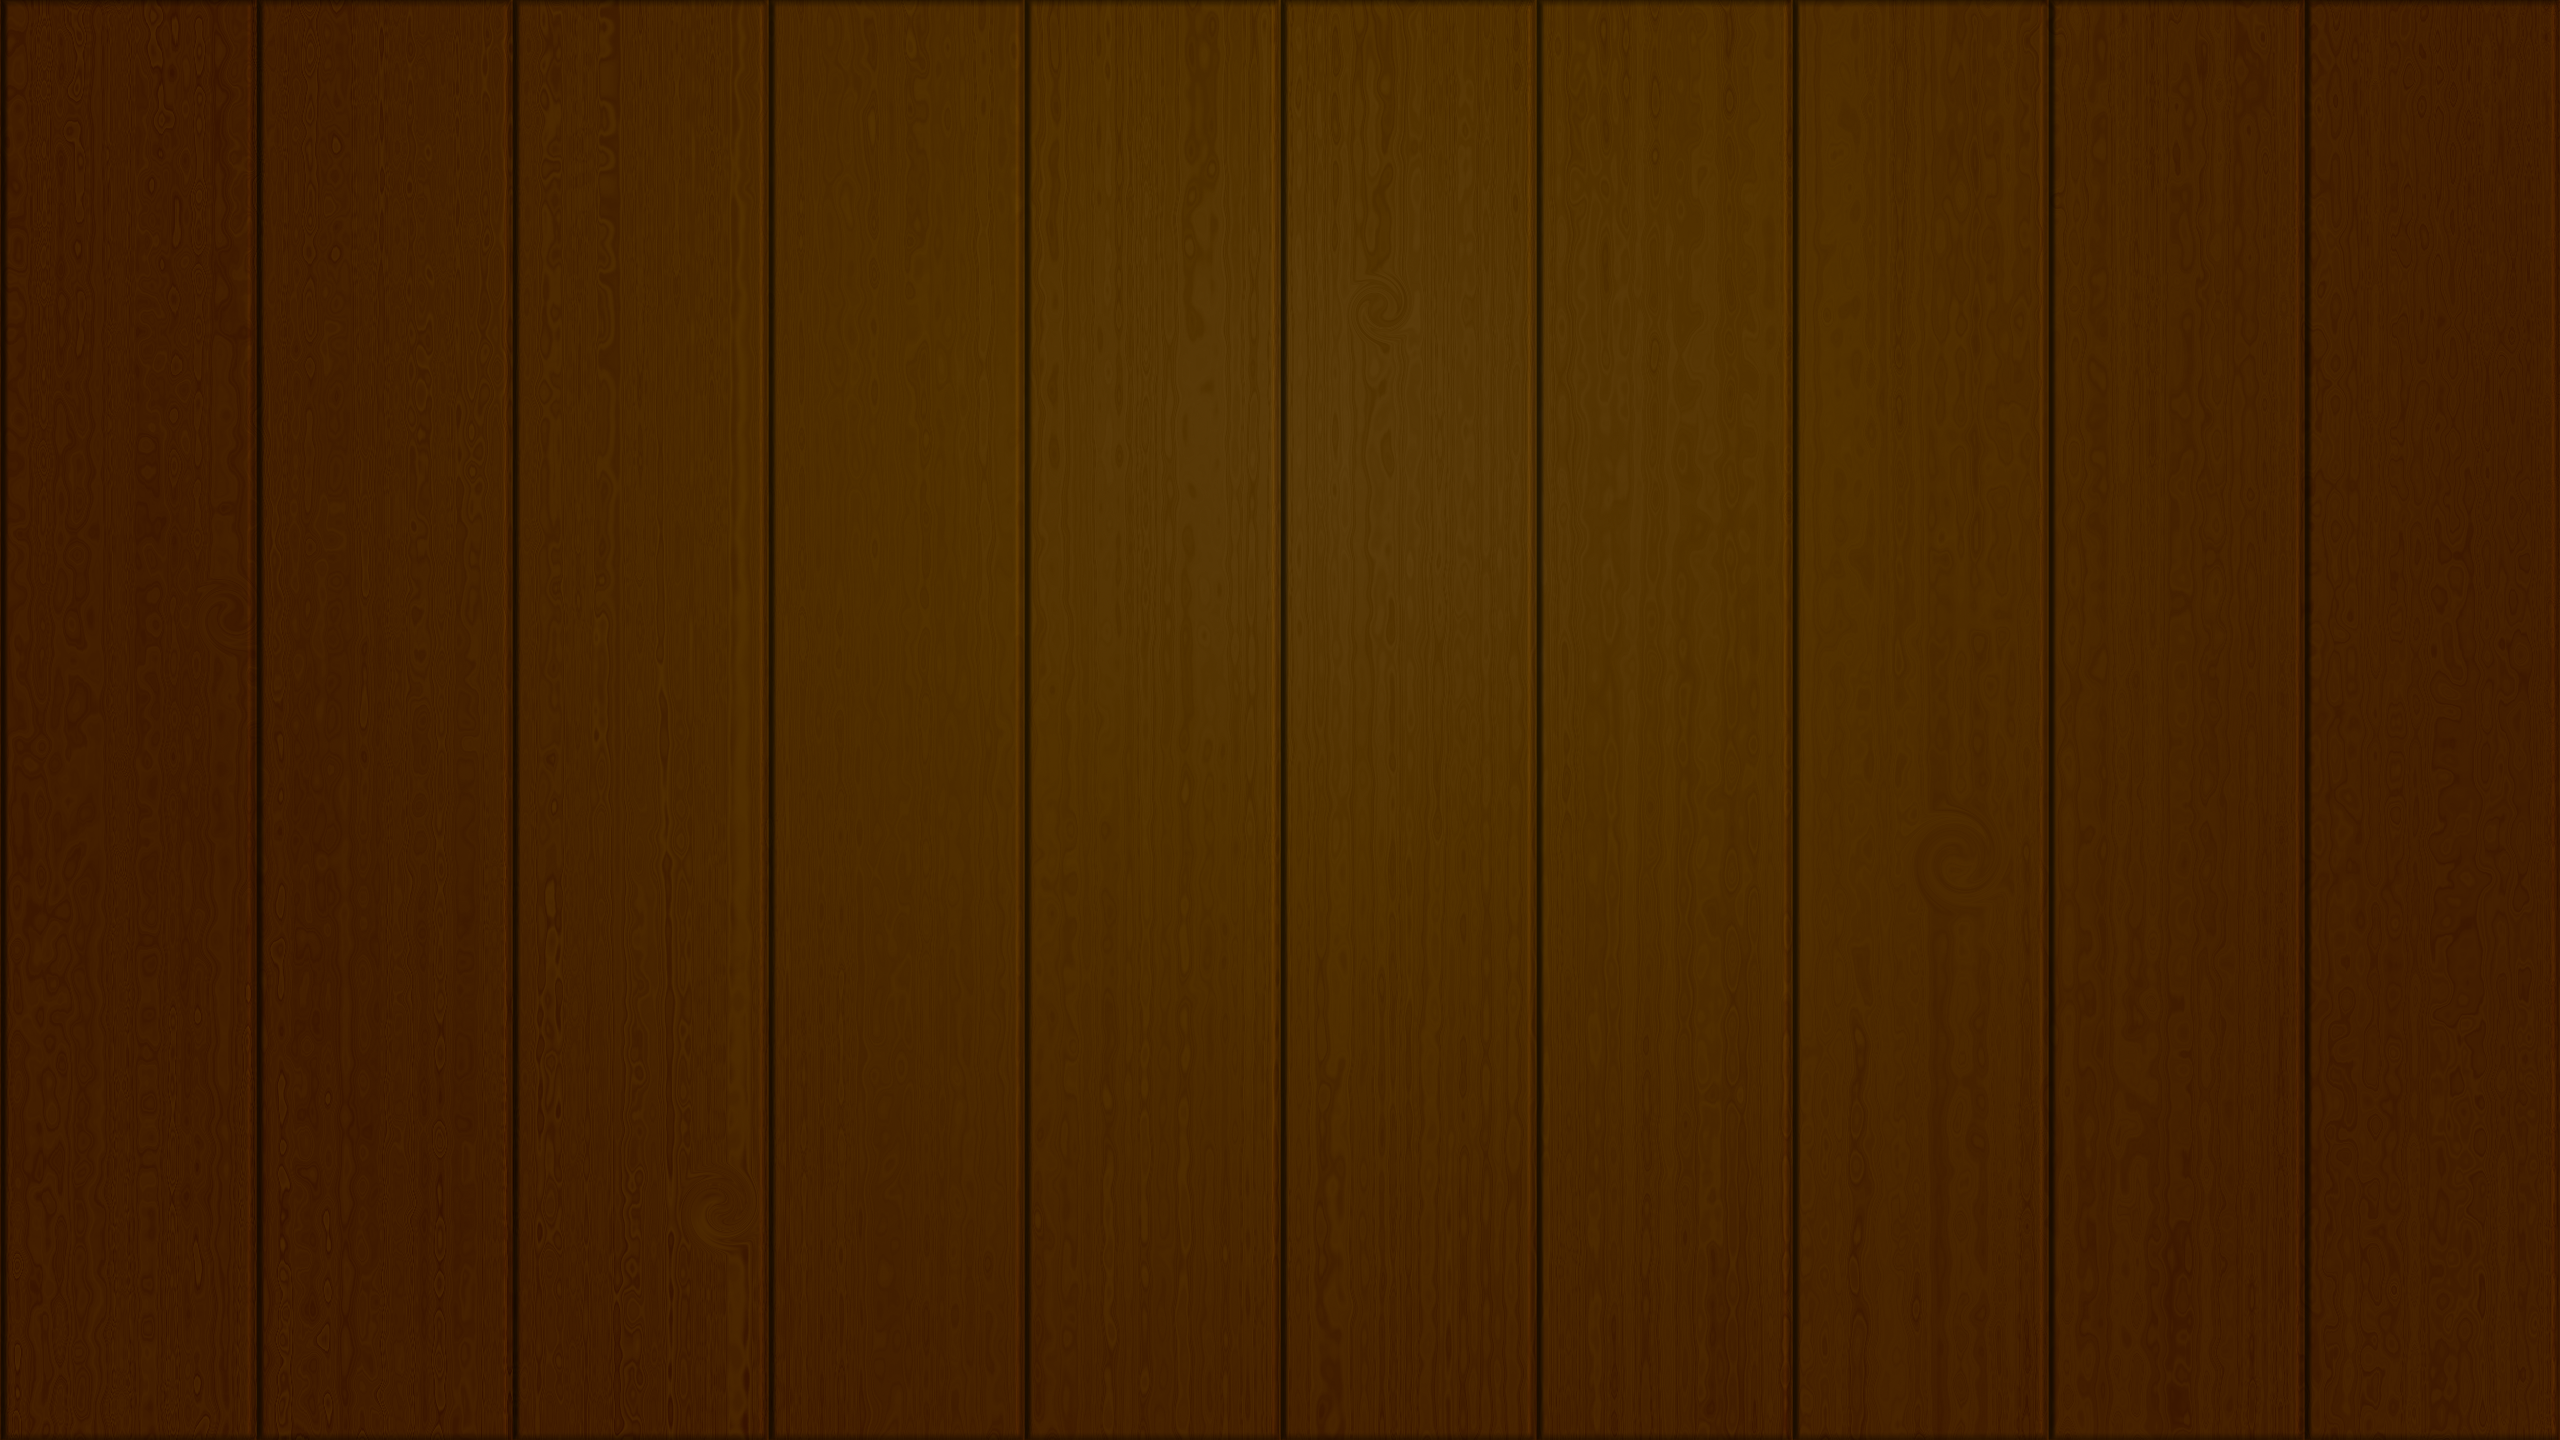 Hd Rich Wood Panelling Texture 2560x1440 By Gizmoguy99 On Deviantart